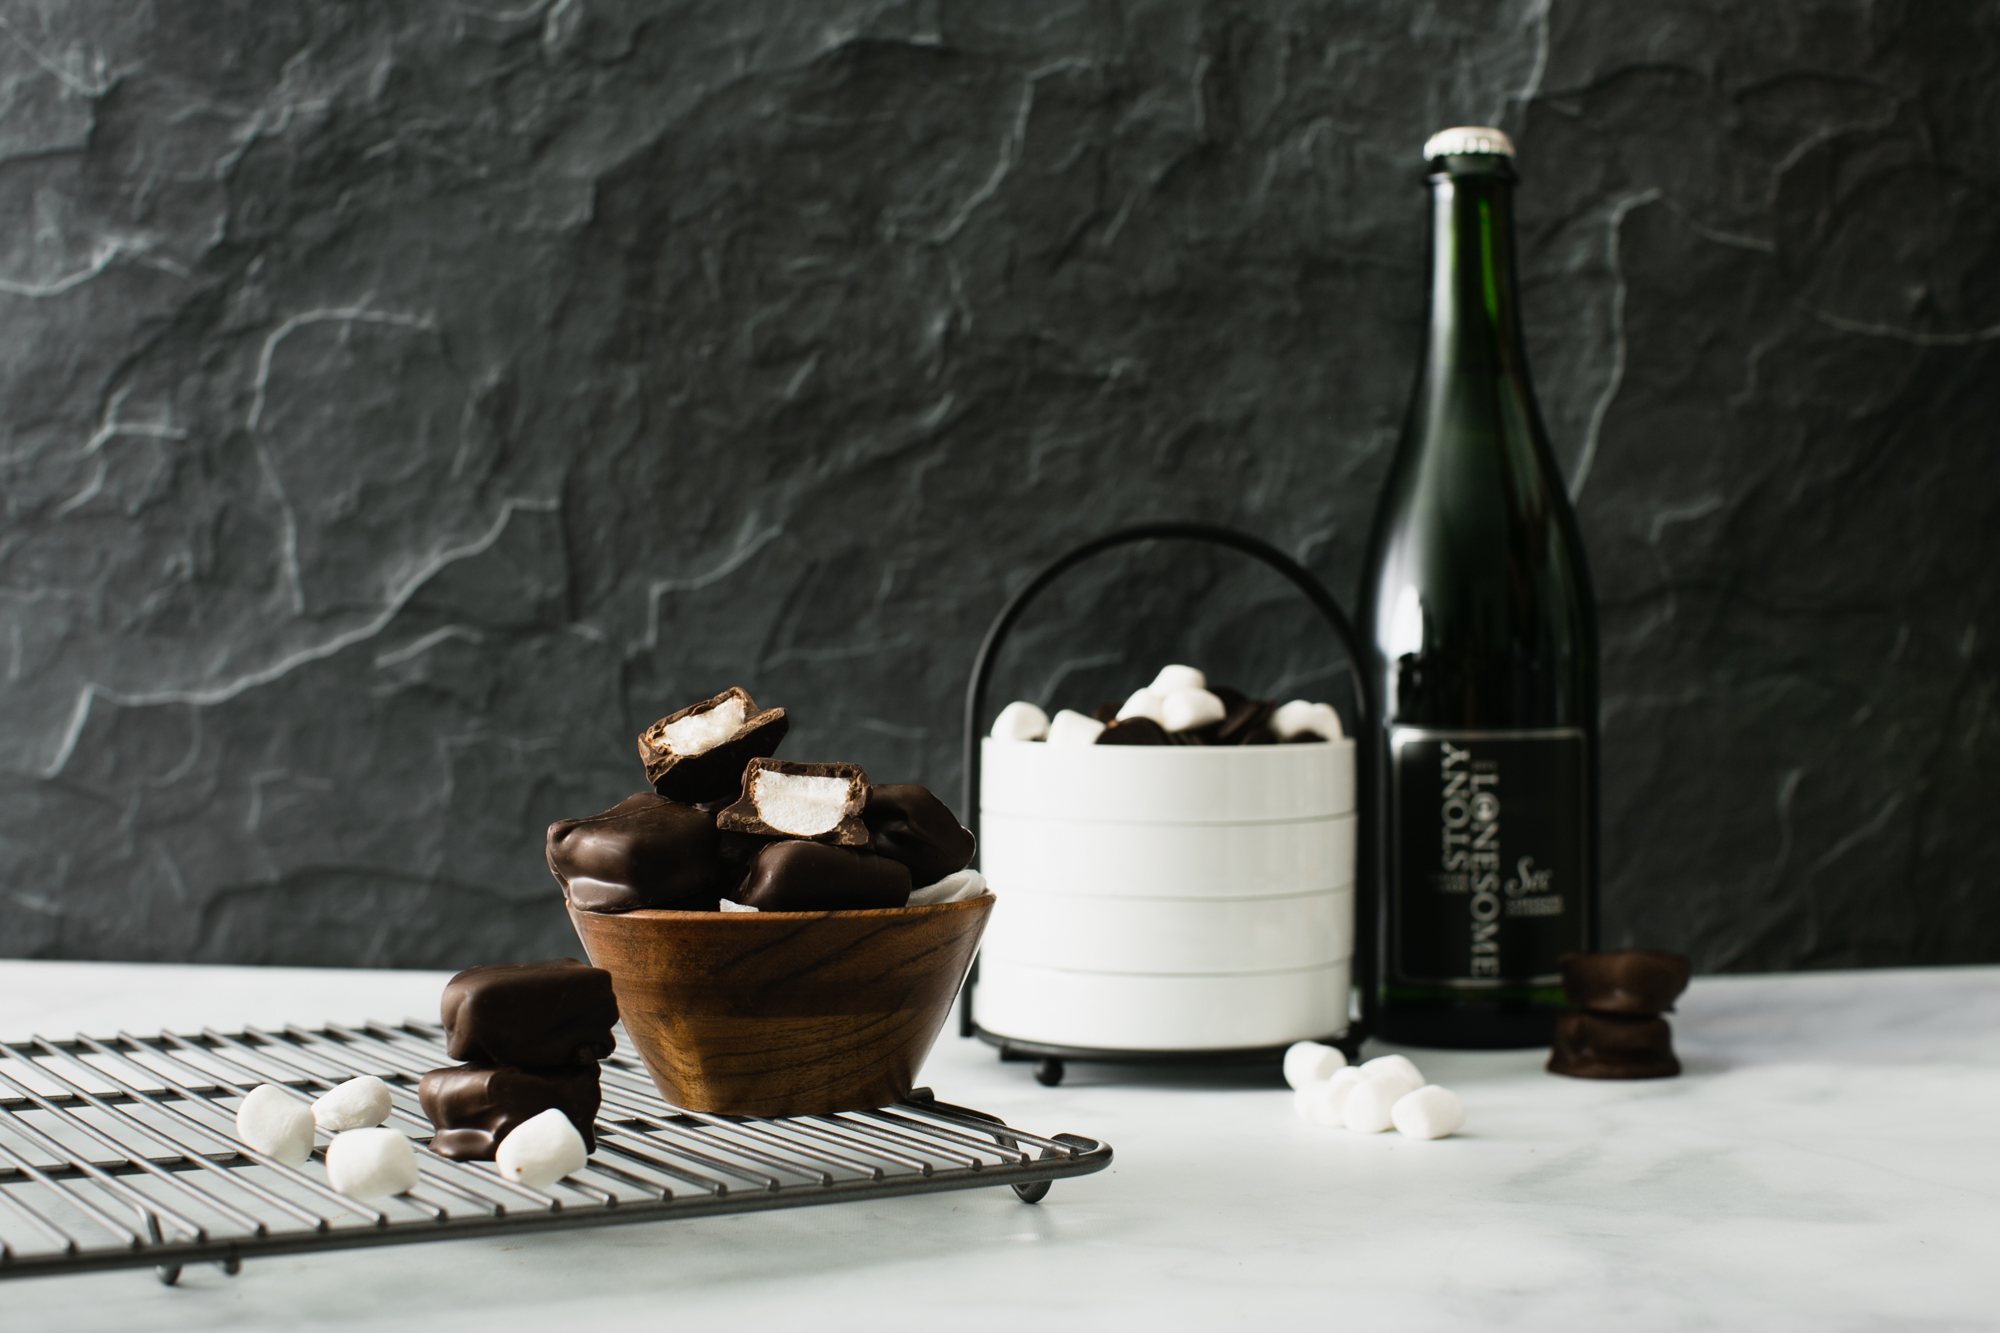 slate and marble kitchen setting with chocolate-covered marshmallows and chardonnay wine